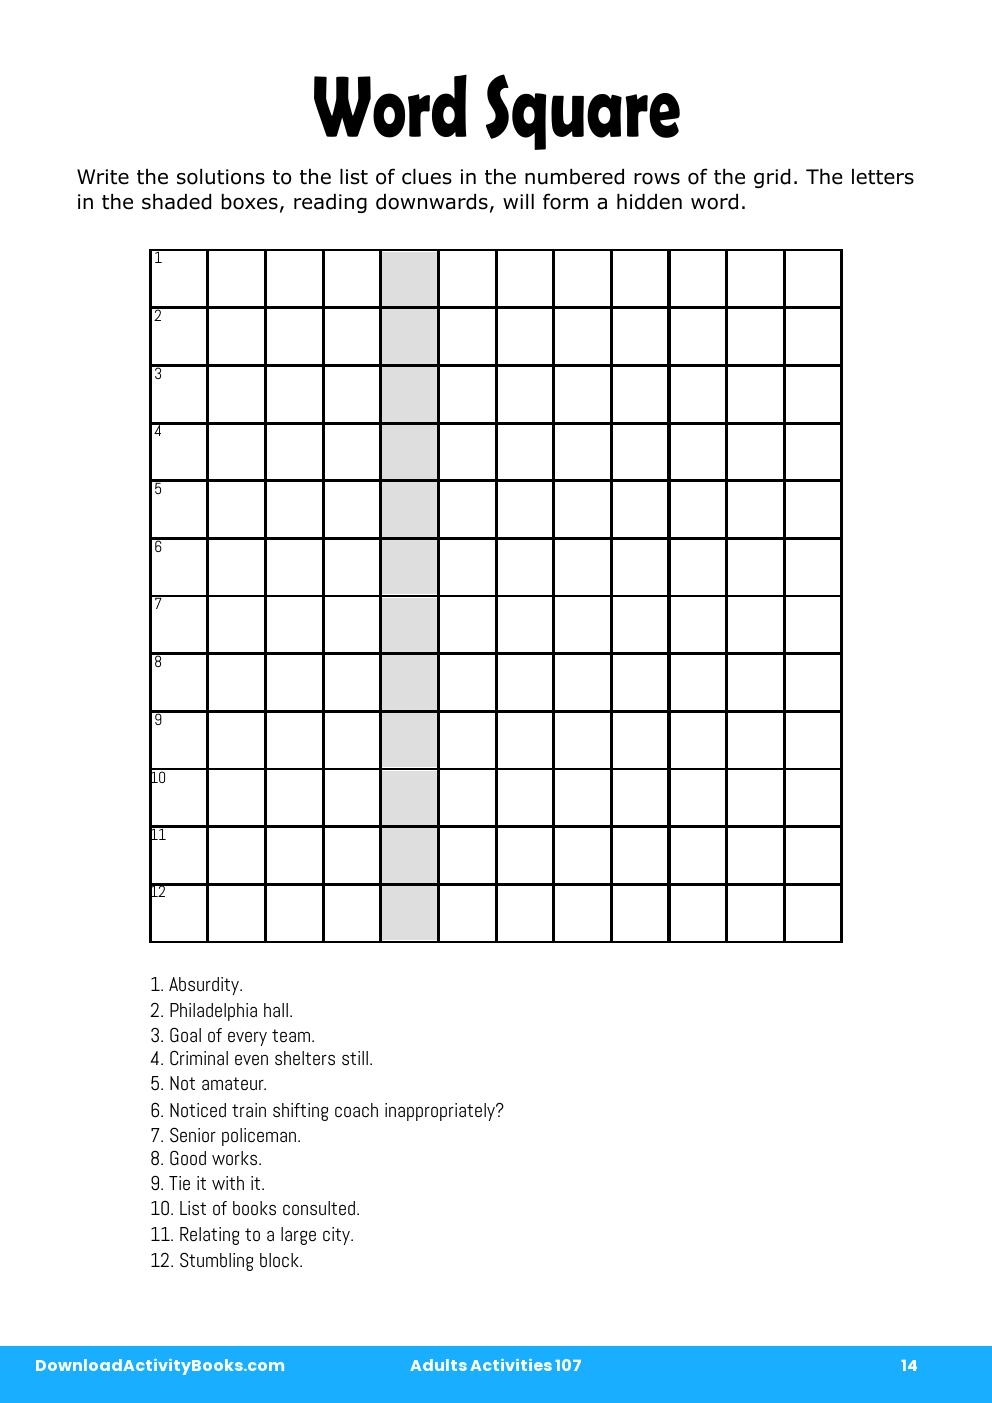 Word Square in Adults Activities 107